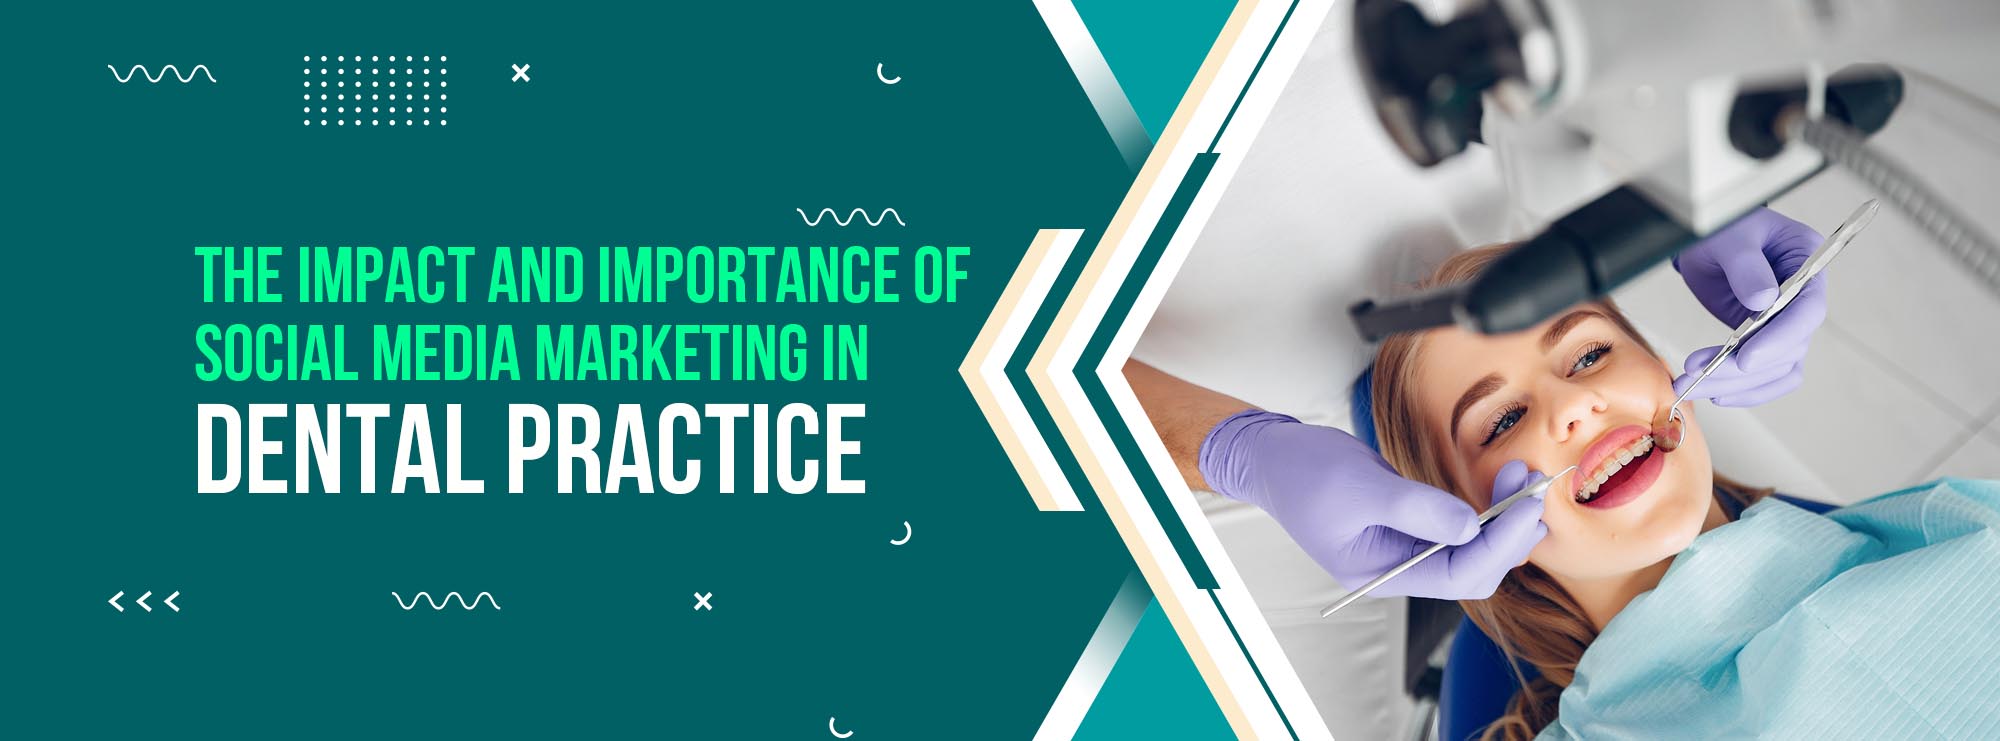 the-impact-and-importance-of-social-media-marketing-in-dental-practice